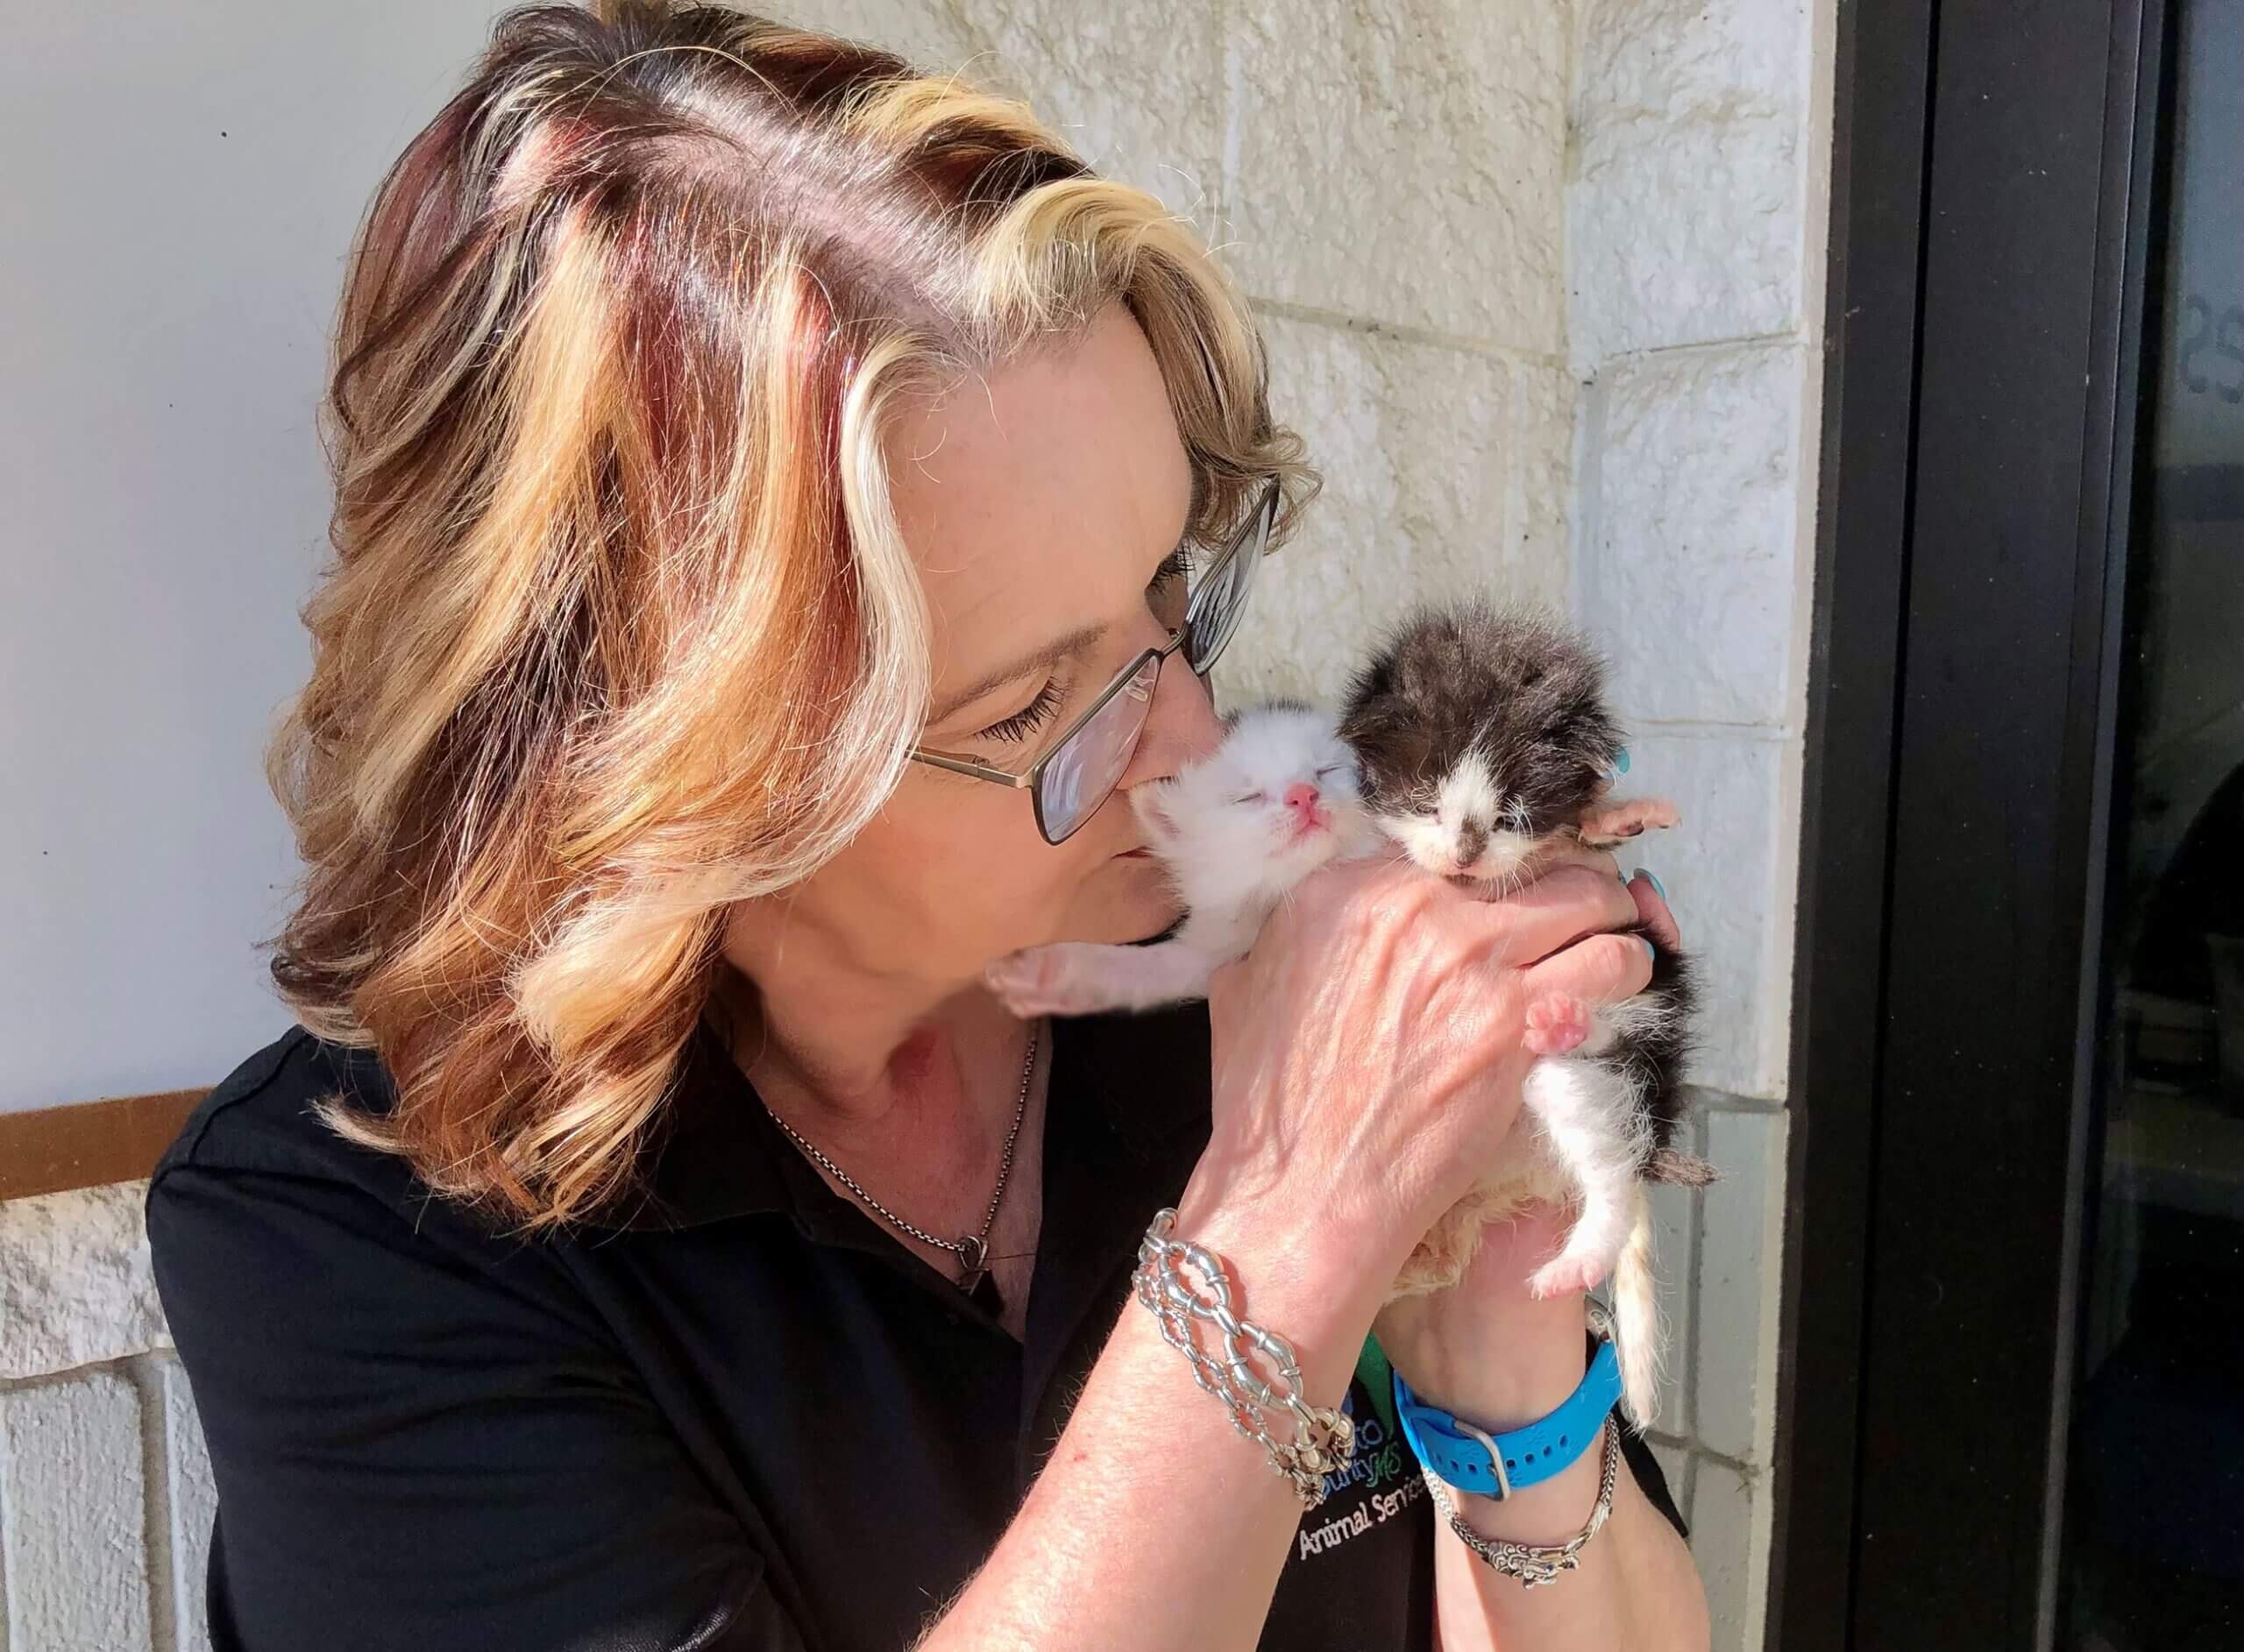 County shelter sees more kittens, puppies